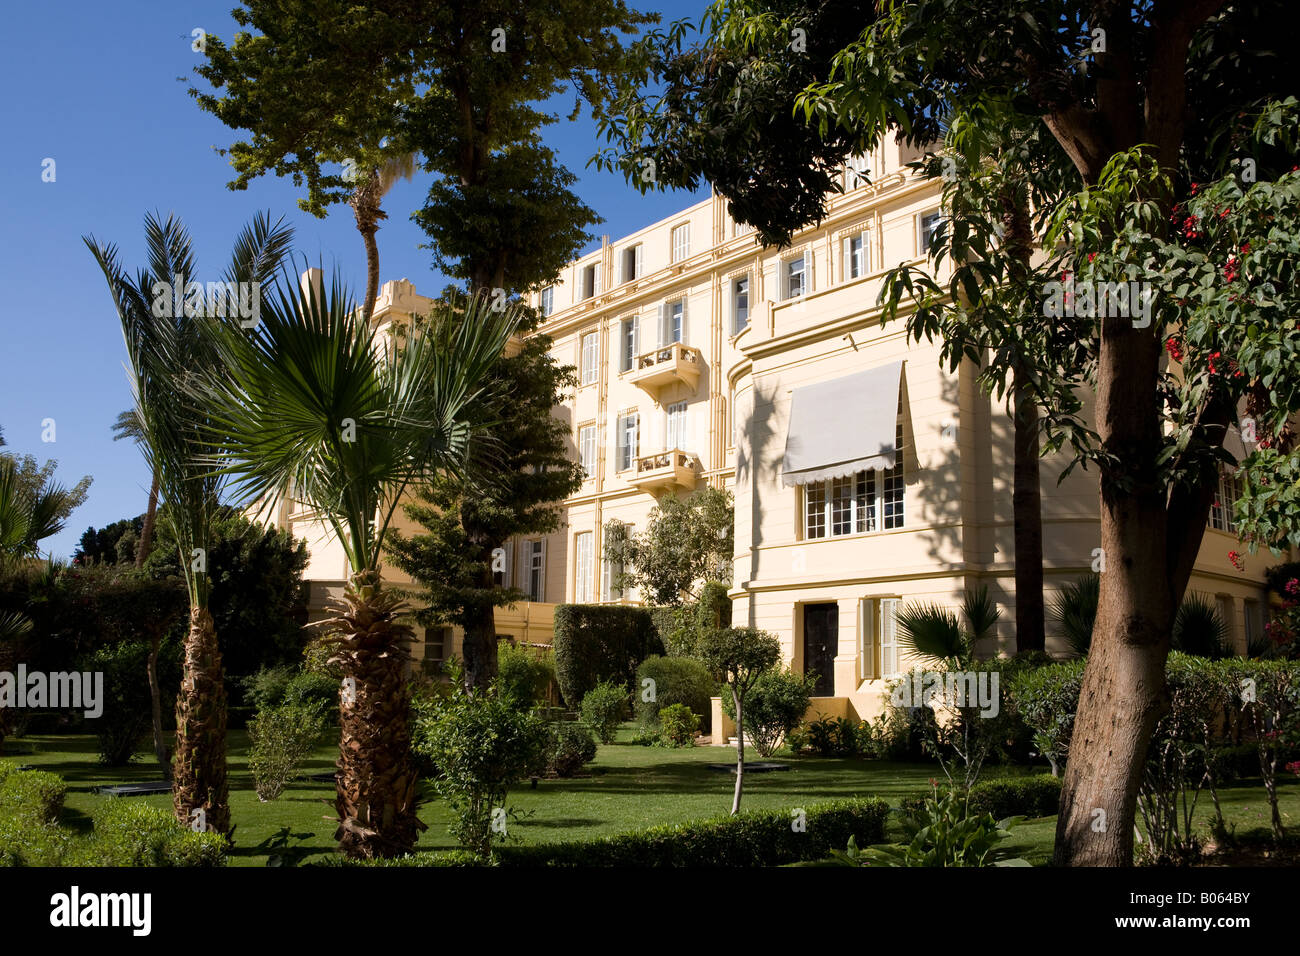 The back of The Old Winter Palace Hotel as seen from the gardens, Luxor Egypt Stock Photo